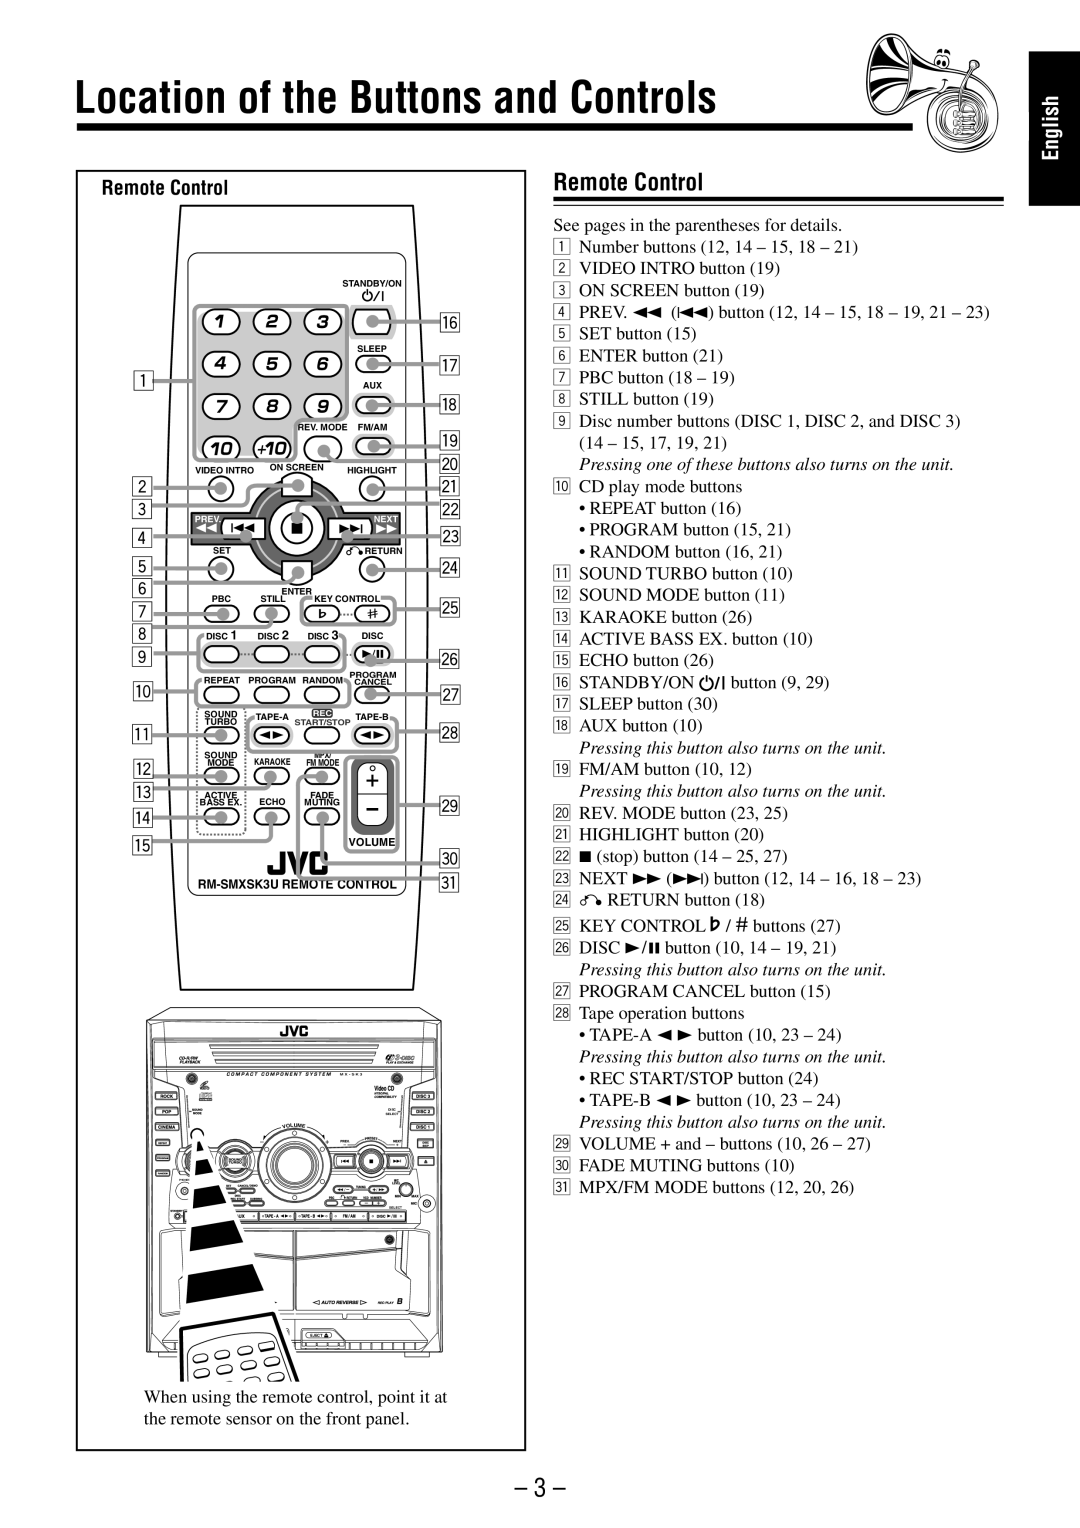 JVC SP-MXSK3, MX-SK3, MX-SK1, CA-MXSK3, SP-MXSK1, CA-MXSK1 manual Location of the Buttons and Controls, Remote Control, English 